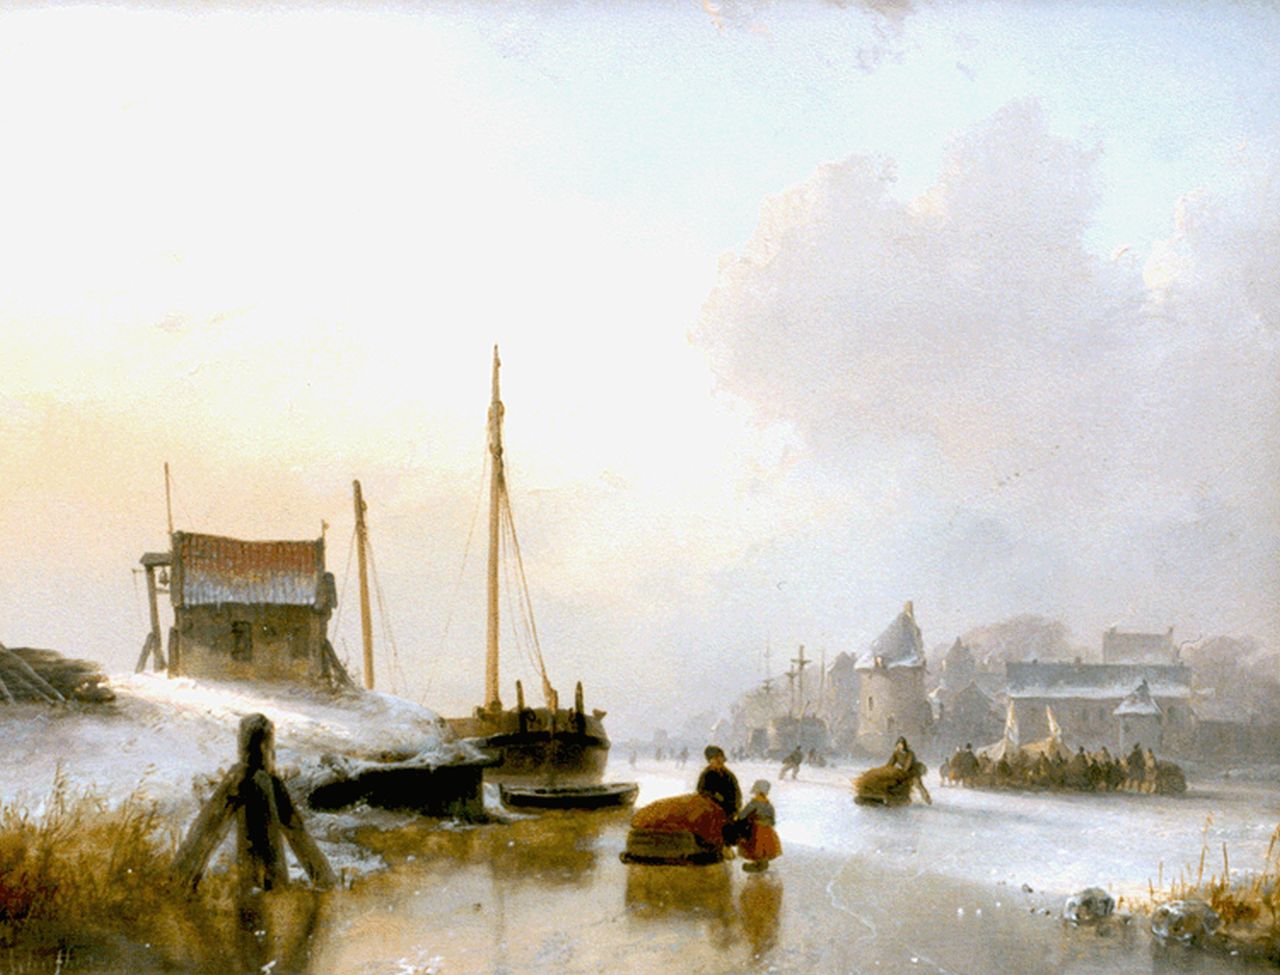 Schelfhout A.  | Andreas Schelfhout, Skaters and a 'koek-en-zopie' on a frozen waterway, oil on panel 25.4 x 32.7 cm, signed l.l.